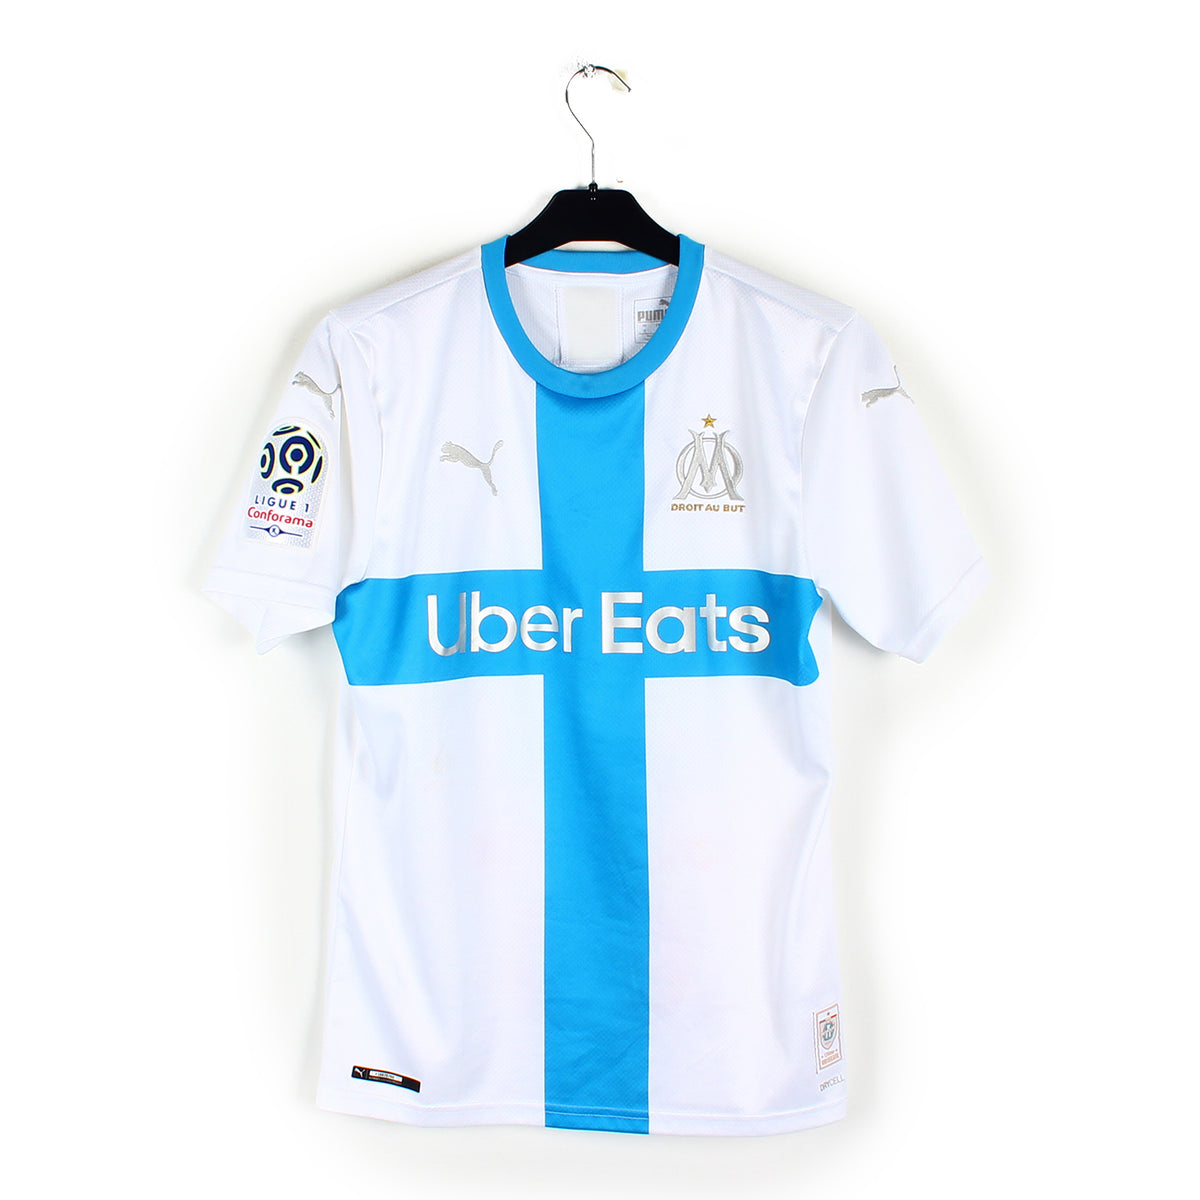 Maillot OM Collector - 120 ans